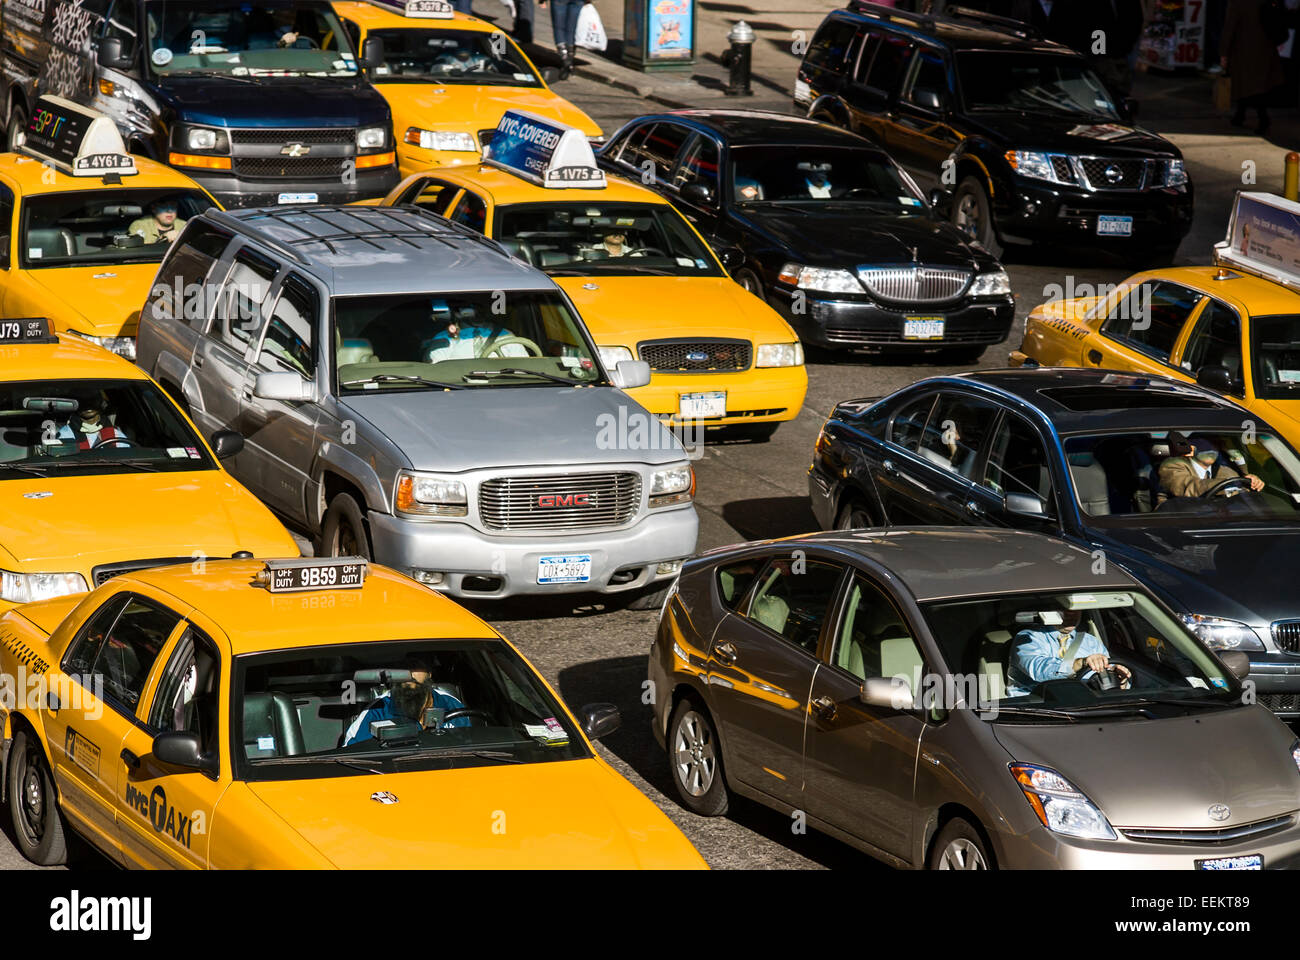 Yellow taxi cabs in rush hour traffic Stock Photo